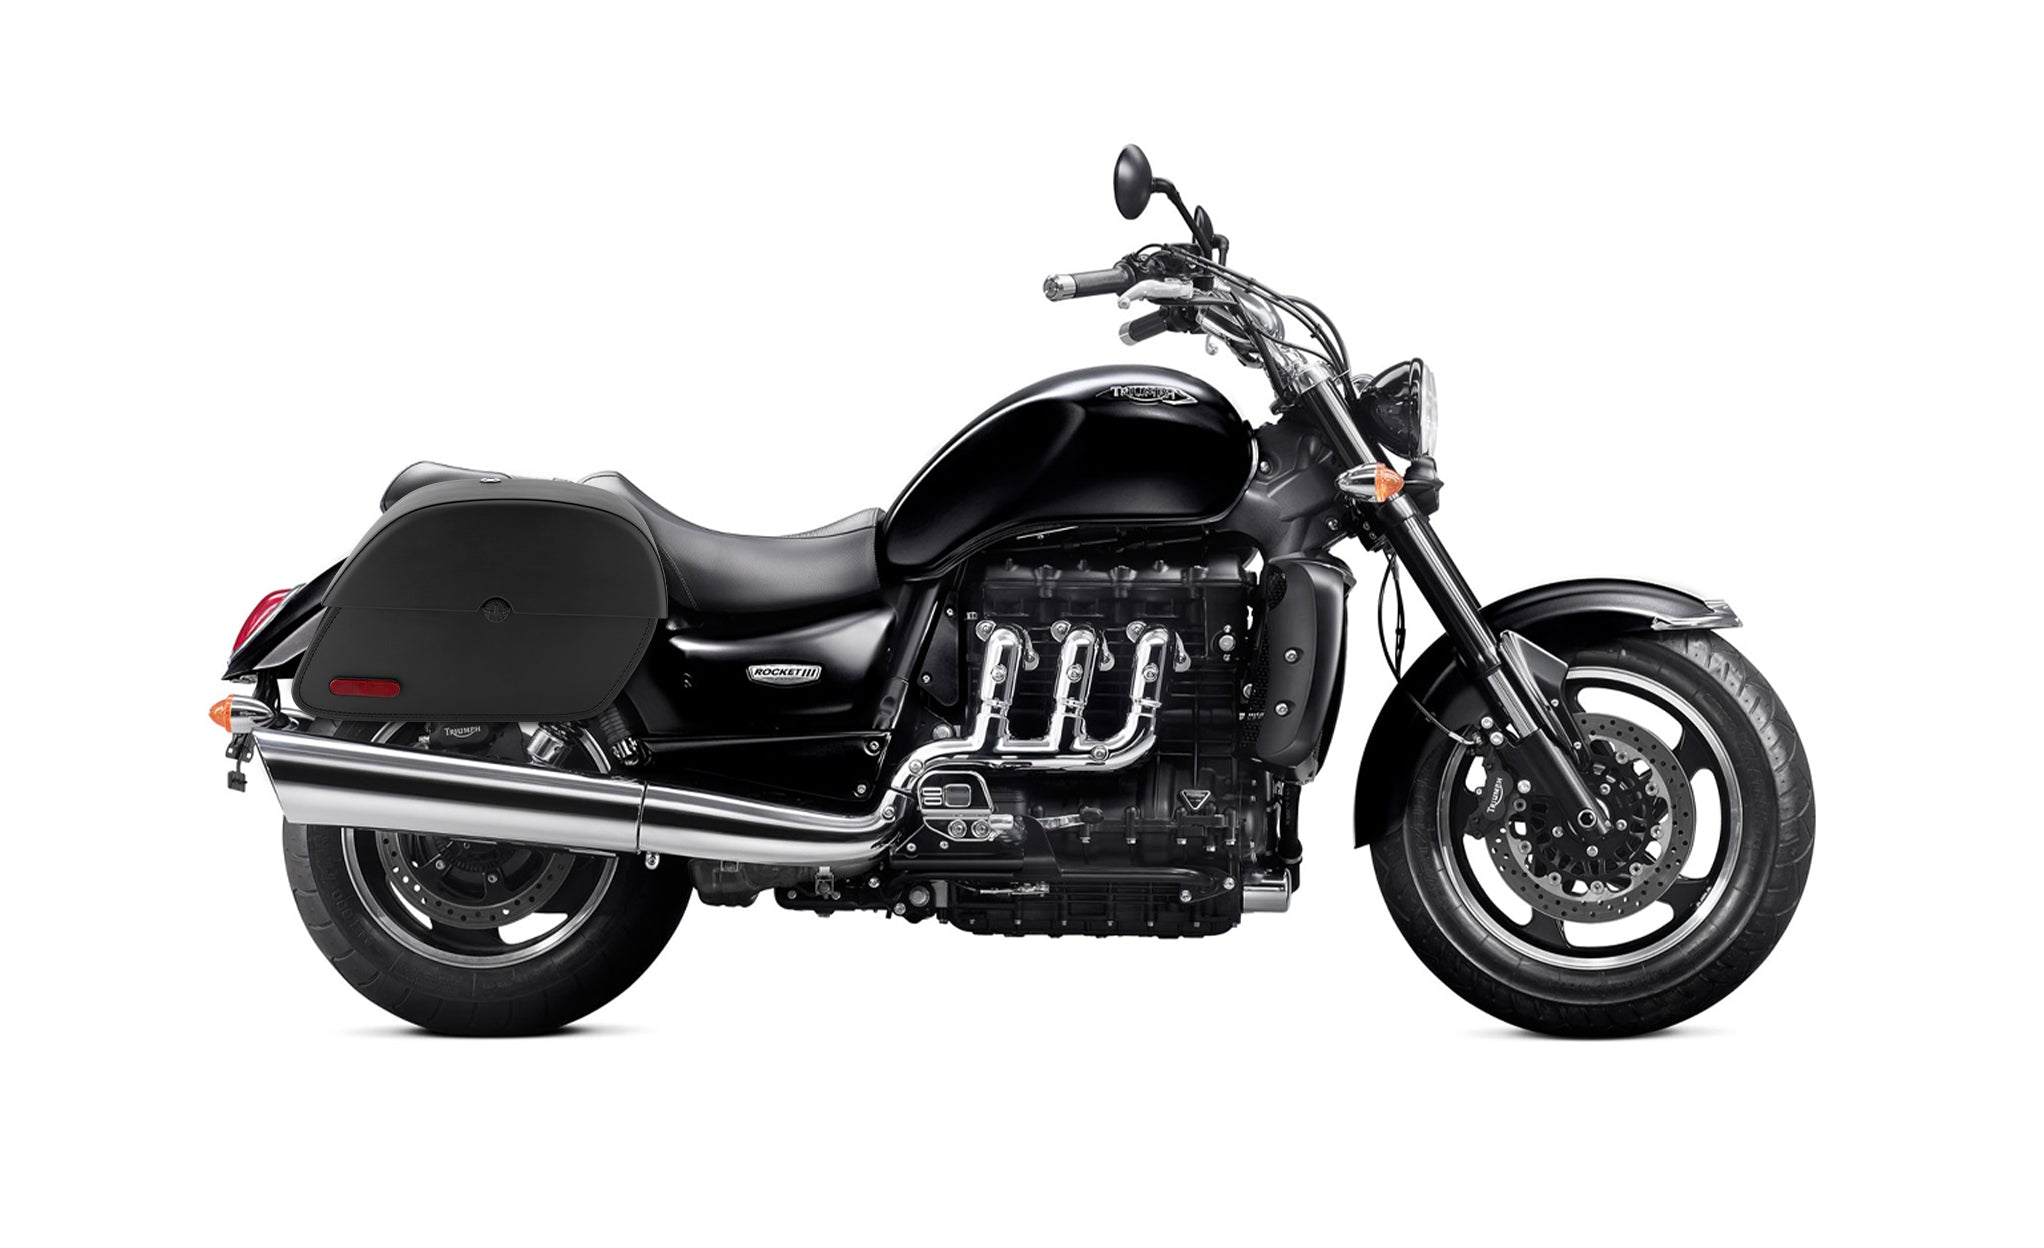 Viking Panzer Medium Triumph Rocket Iii Classic Leather Motorcycle Saddlebags Engineering Excellence with Bag on Bike @expand